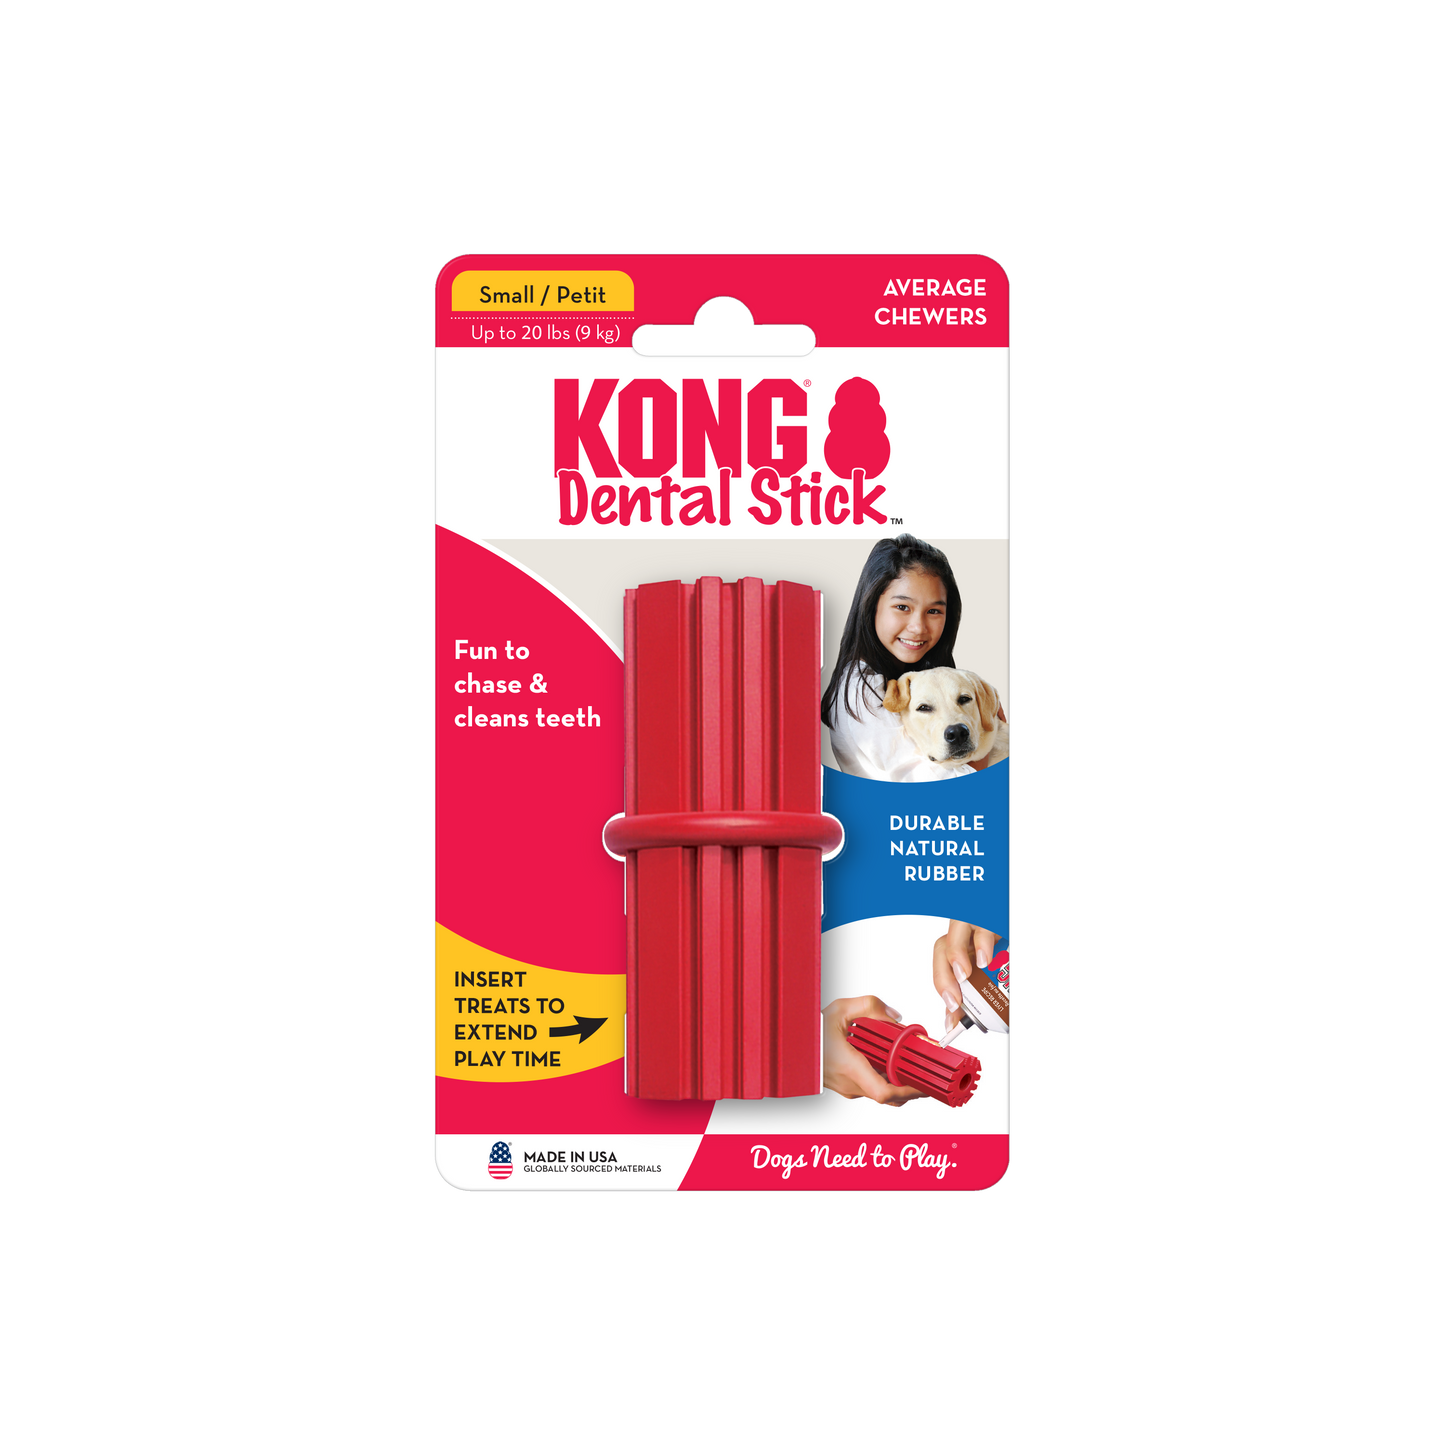 Your Whole Dog SALE: KONG Dental Stick - the ultimate dental care solution for dogs, specifically designed to promote healthy gums and teeth.